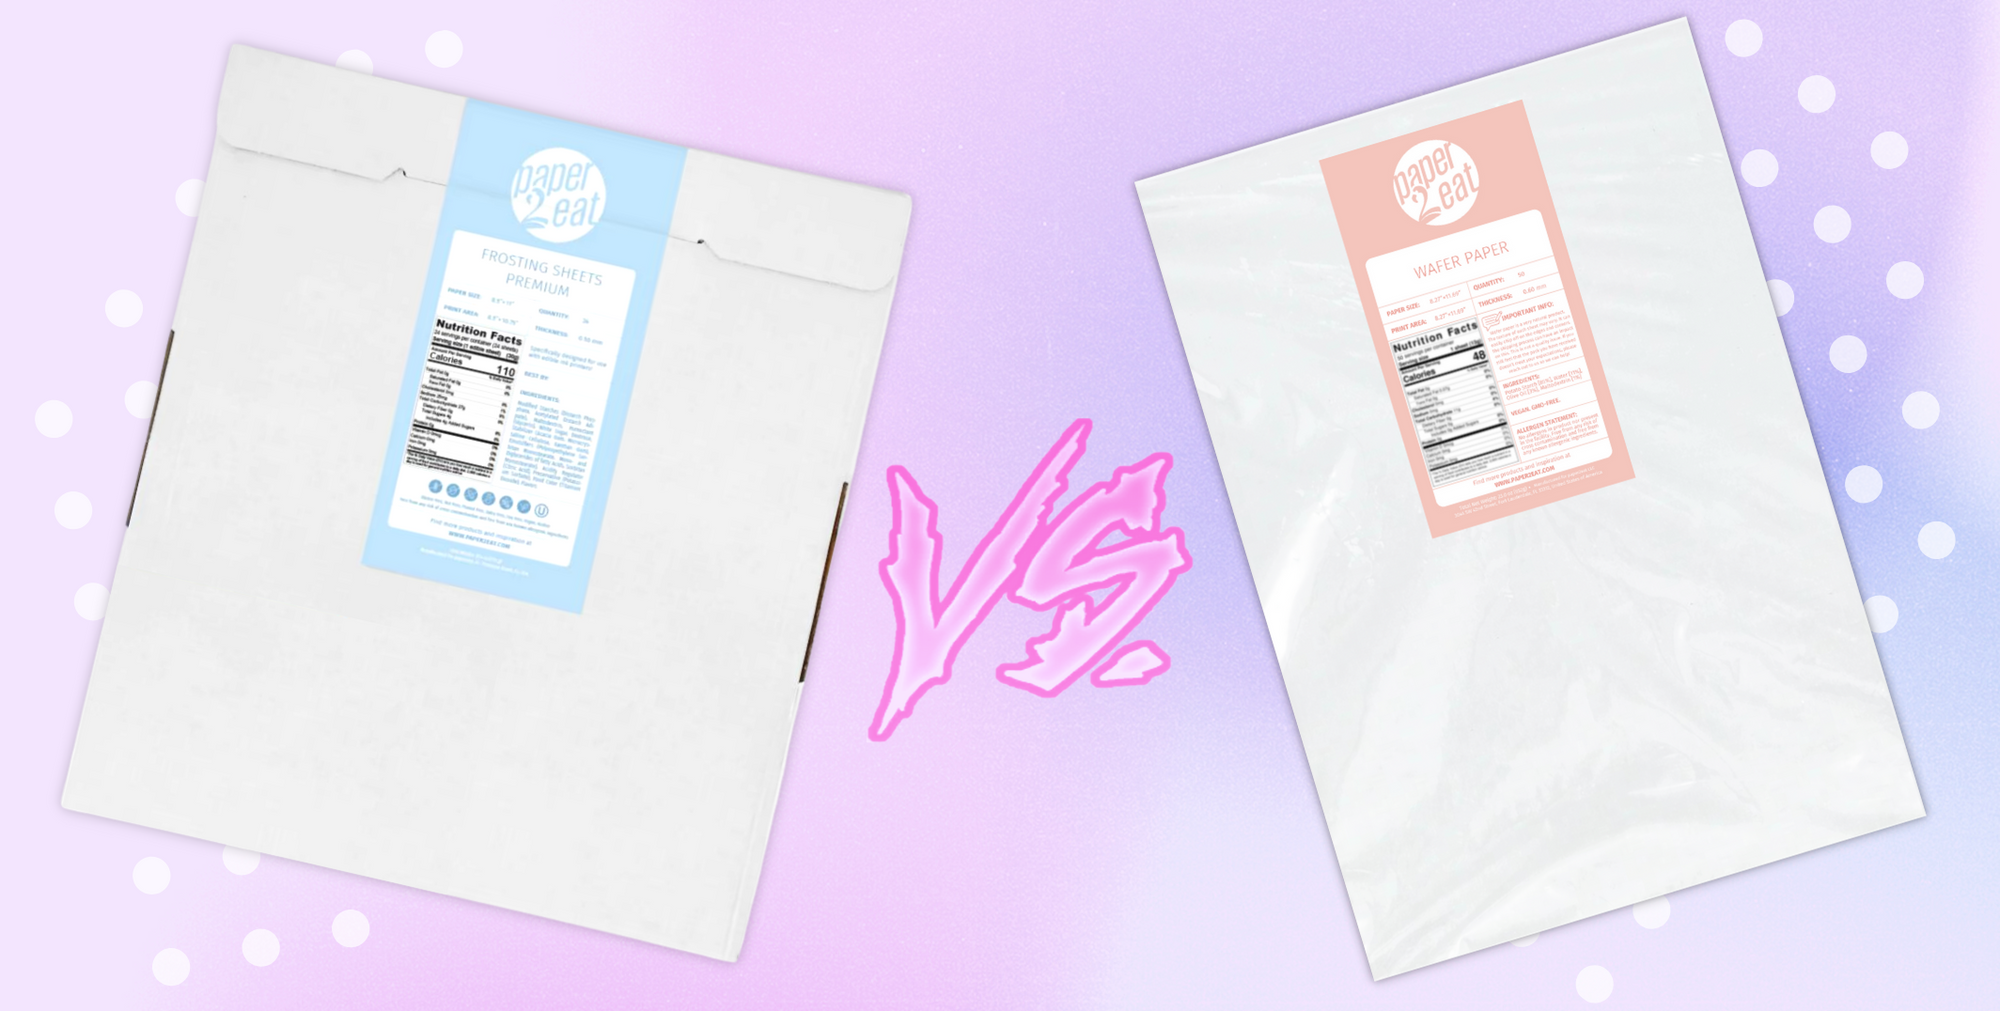 Wafer Paper or Icing Sheets - Which Should I Choose for Edible